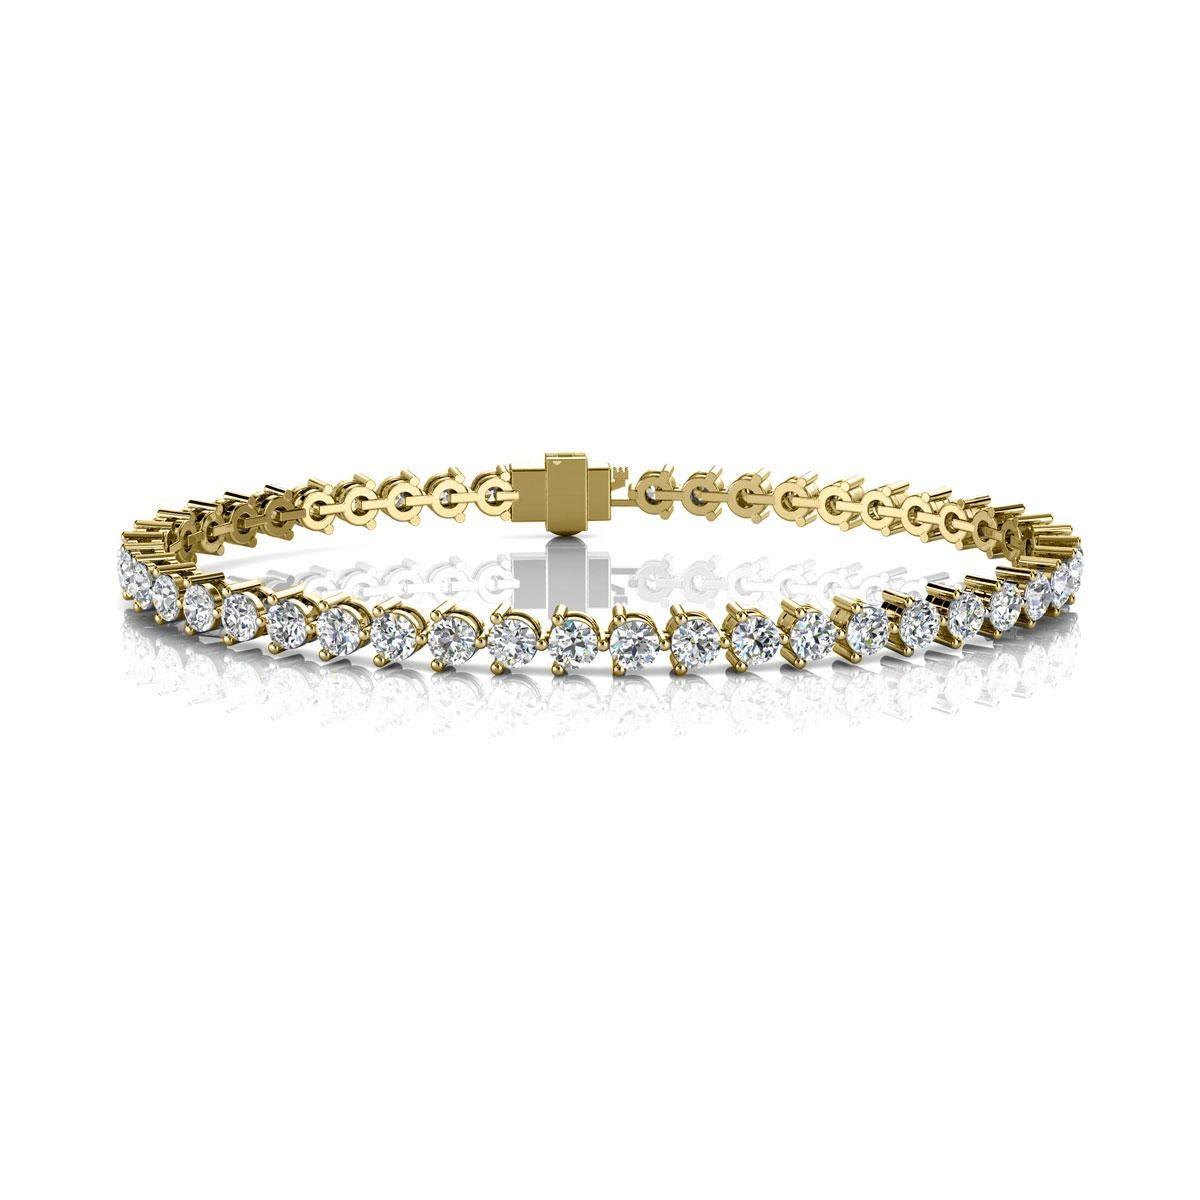 A timeless three prongs diamonds tennis bracelet. Experience the Difference!

Product details: 

Center Gemstone Type: NATURAL DIAMOND
Center Gemstone Color: WHITE
Center Gemstone Shape: ROUND
Center Diamond Carat Weight: 5
Metal: 14K Yellow